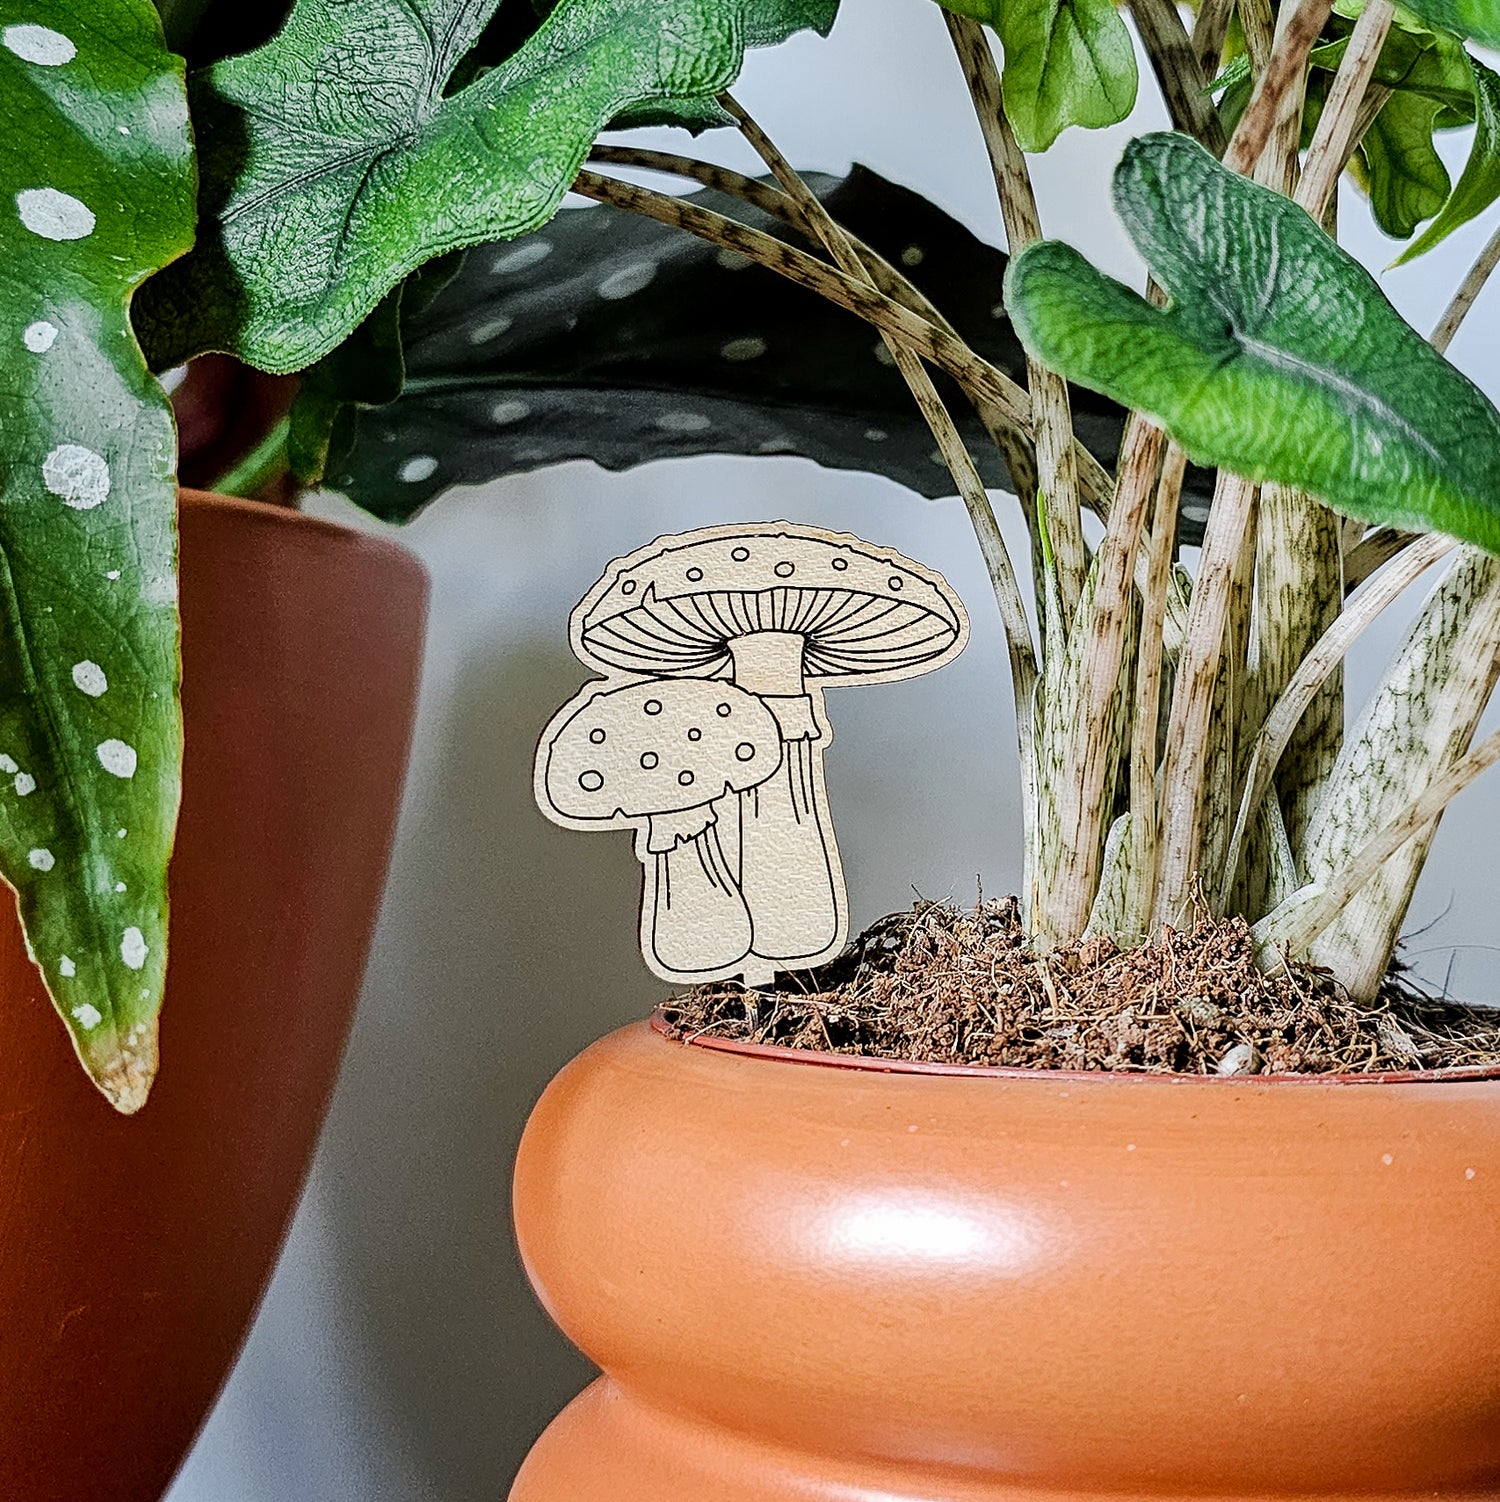 Amanita mushroom wooden houseplant accessory stake to decorate pots of indoor plants.